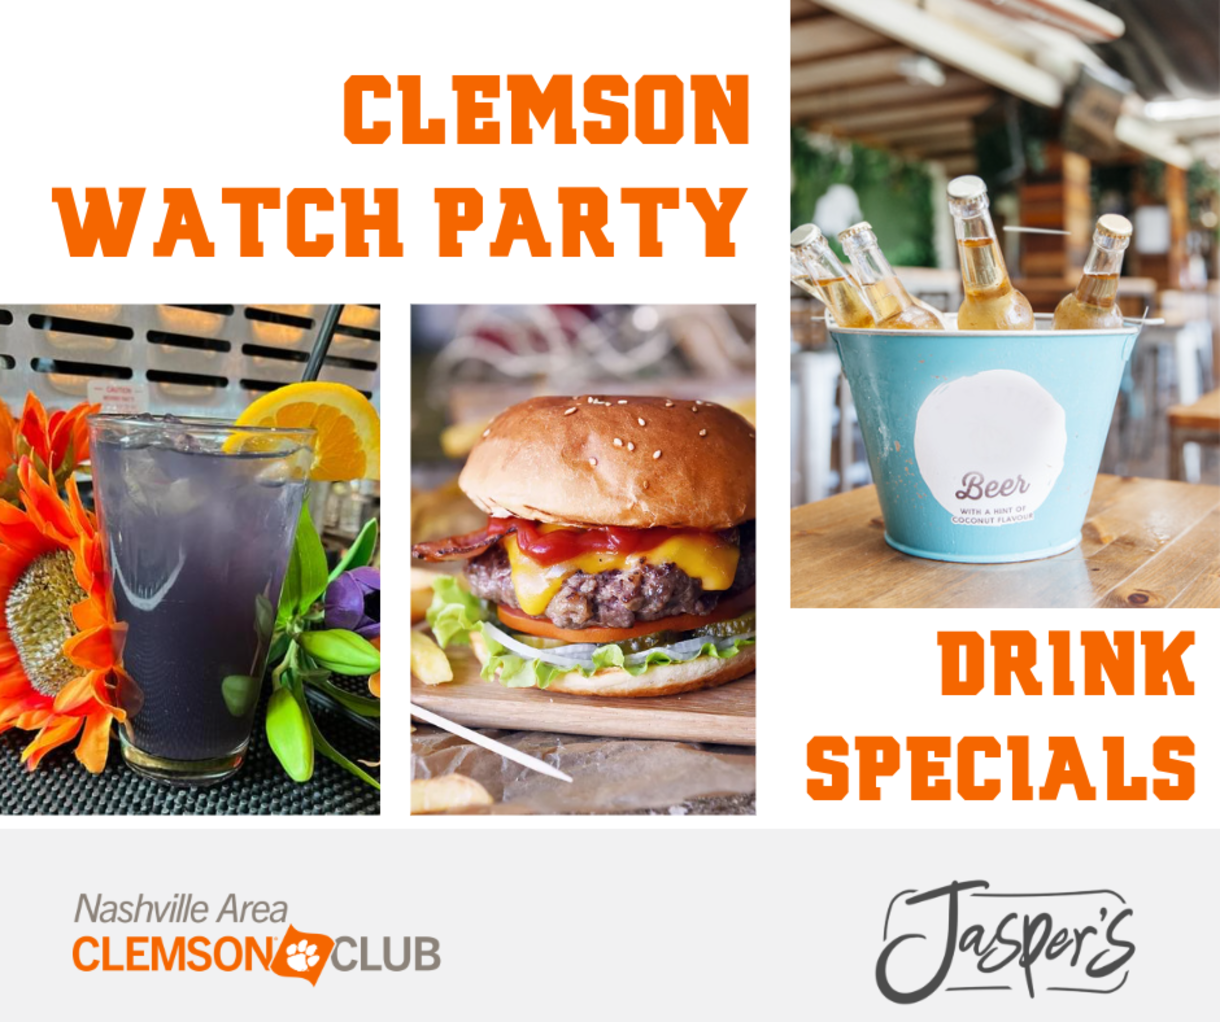 Clemson Watch Party at Jaspers. Drink Specials